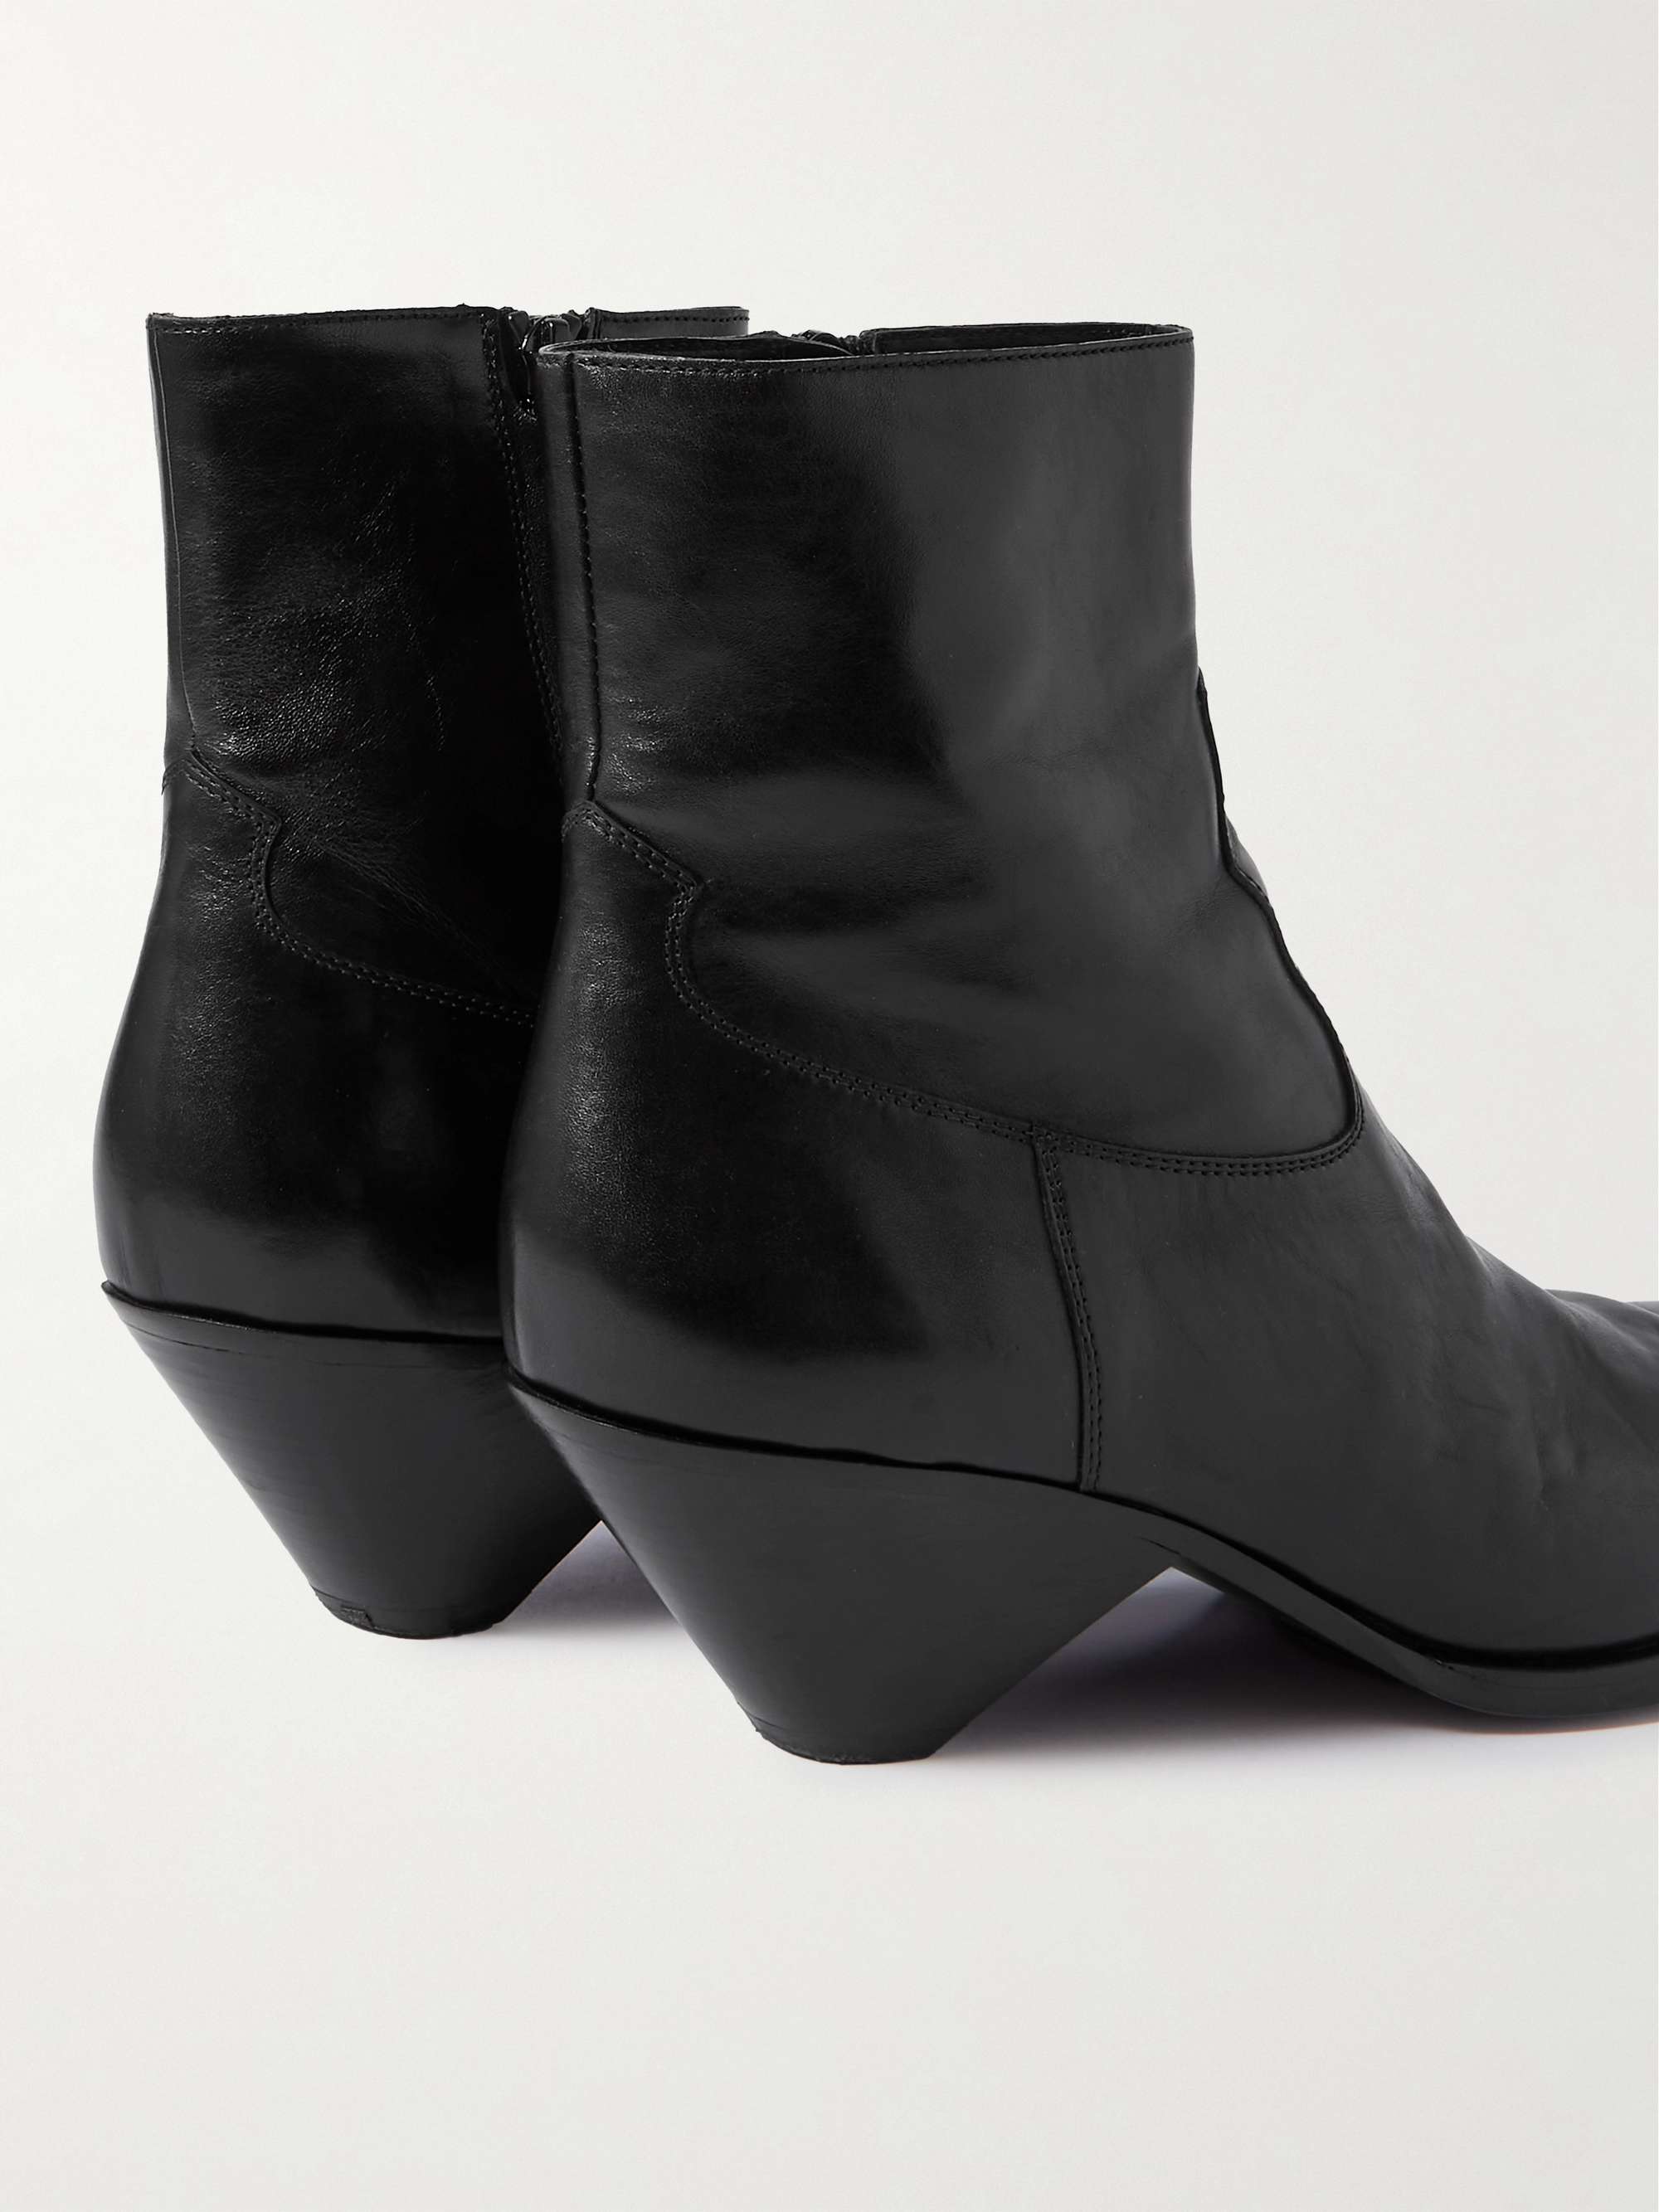 CELINE HOMME Leather Western Boots